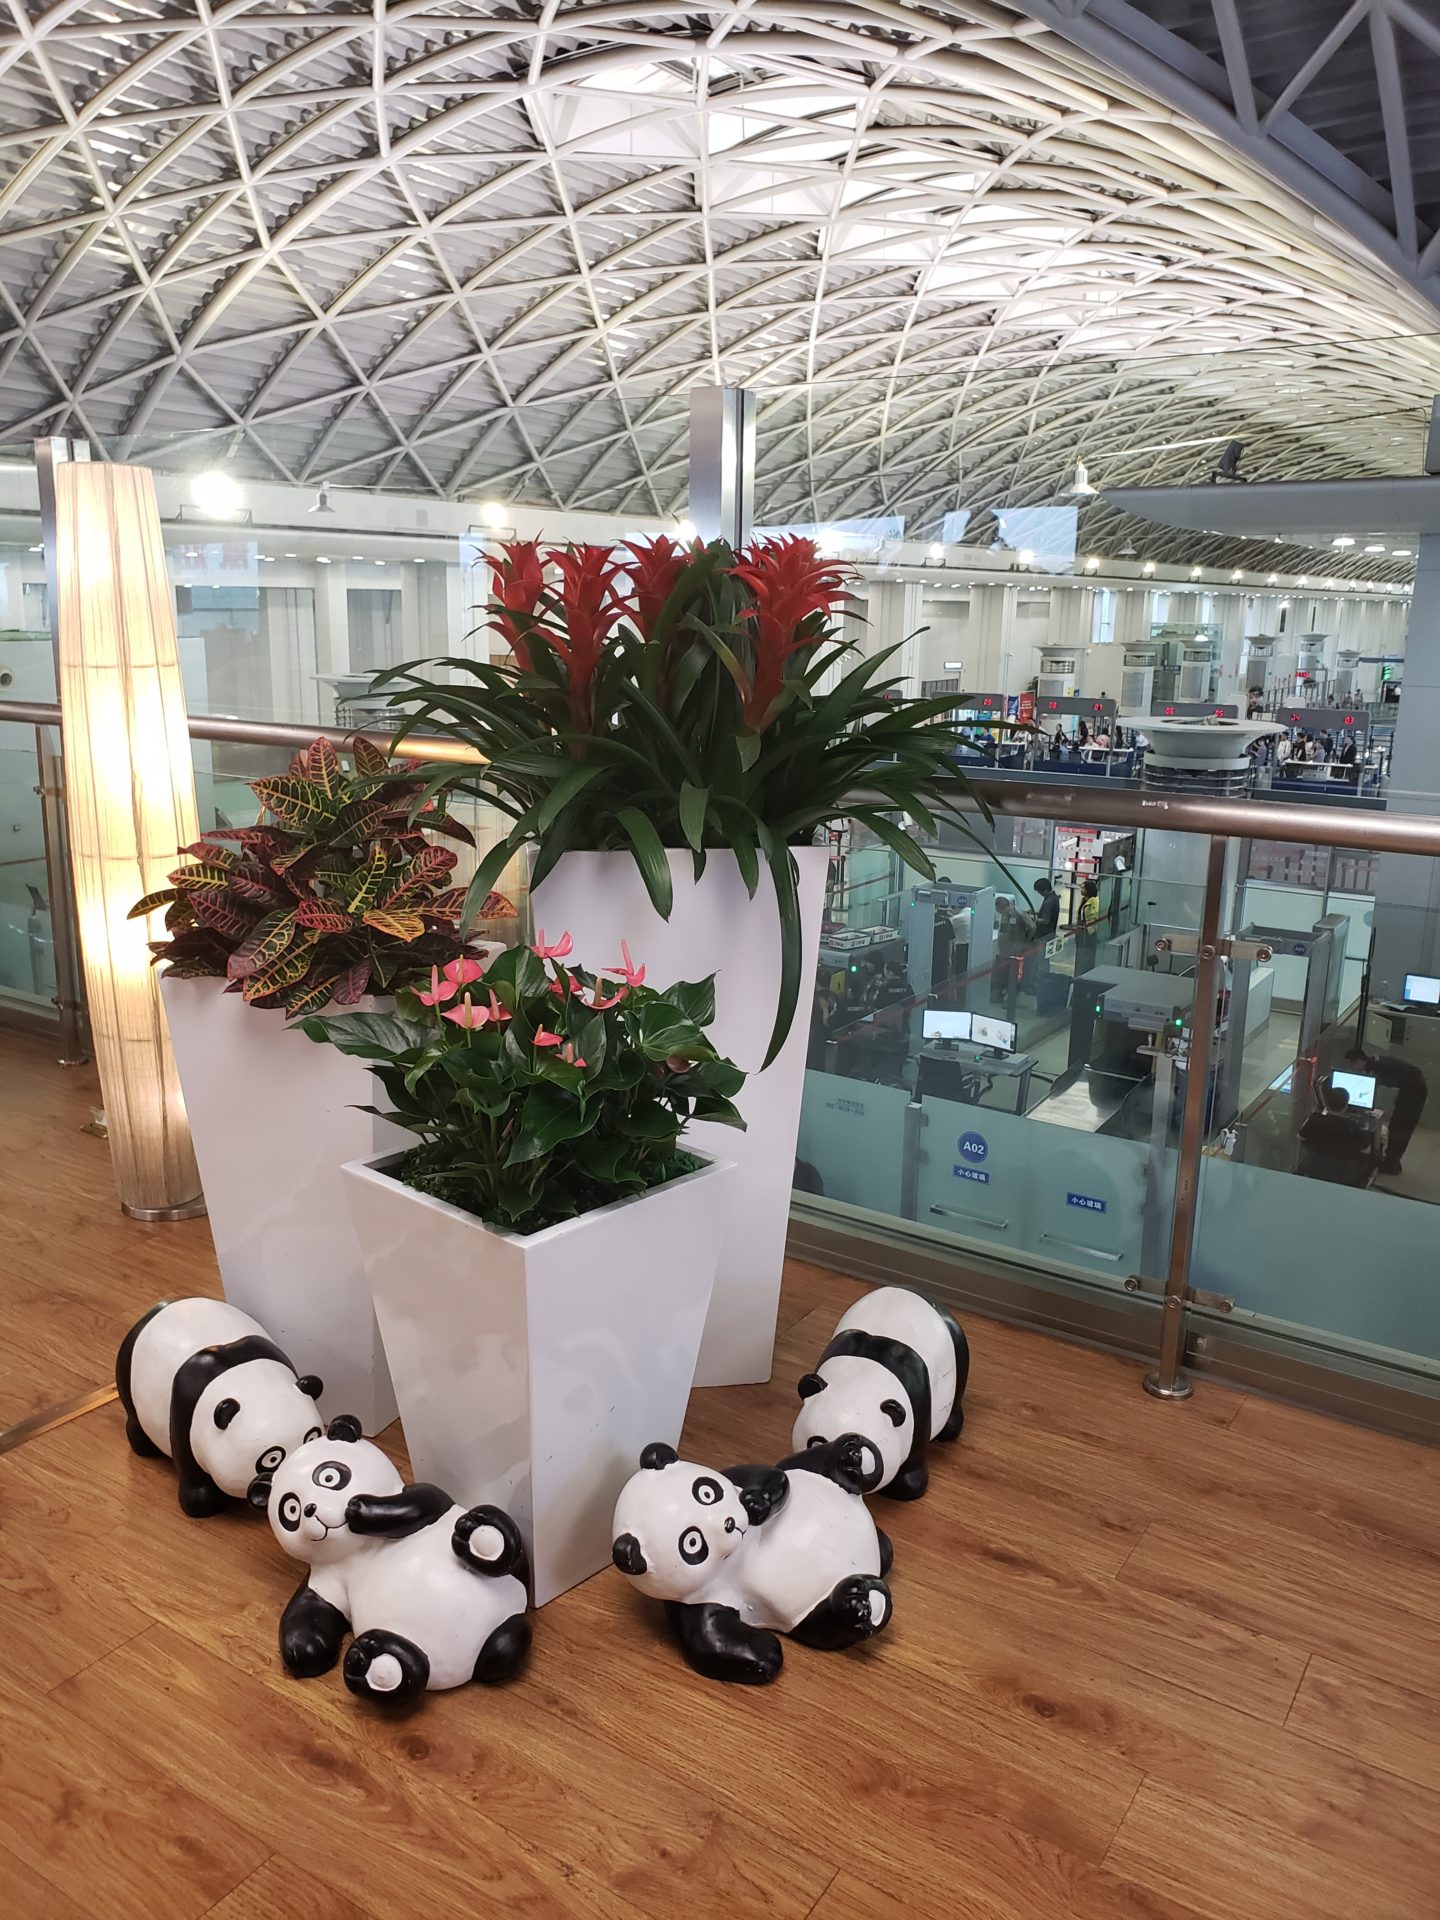 a group of pandas and plants in a room with glass walls